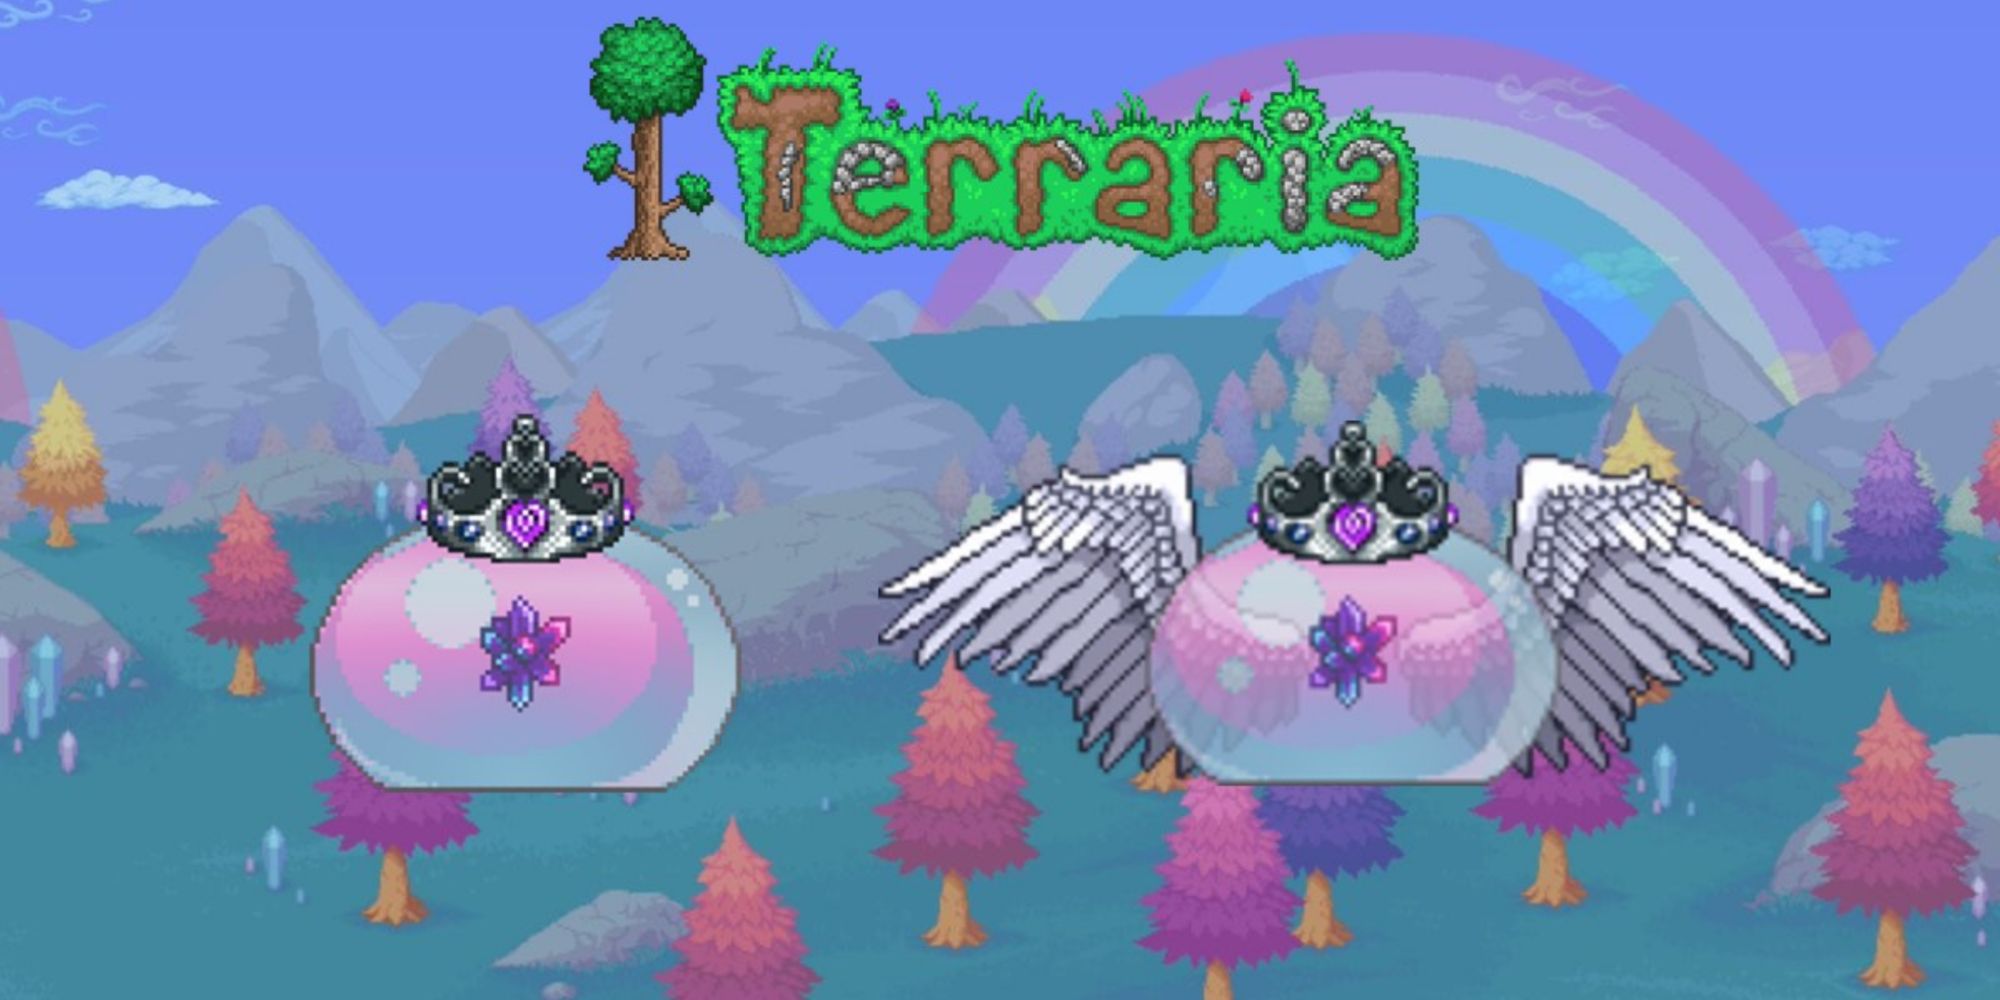 Terraria Queen Slime Boss Guide: How to Summon, All Attacks